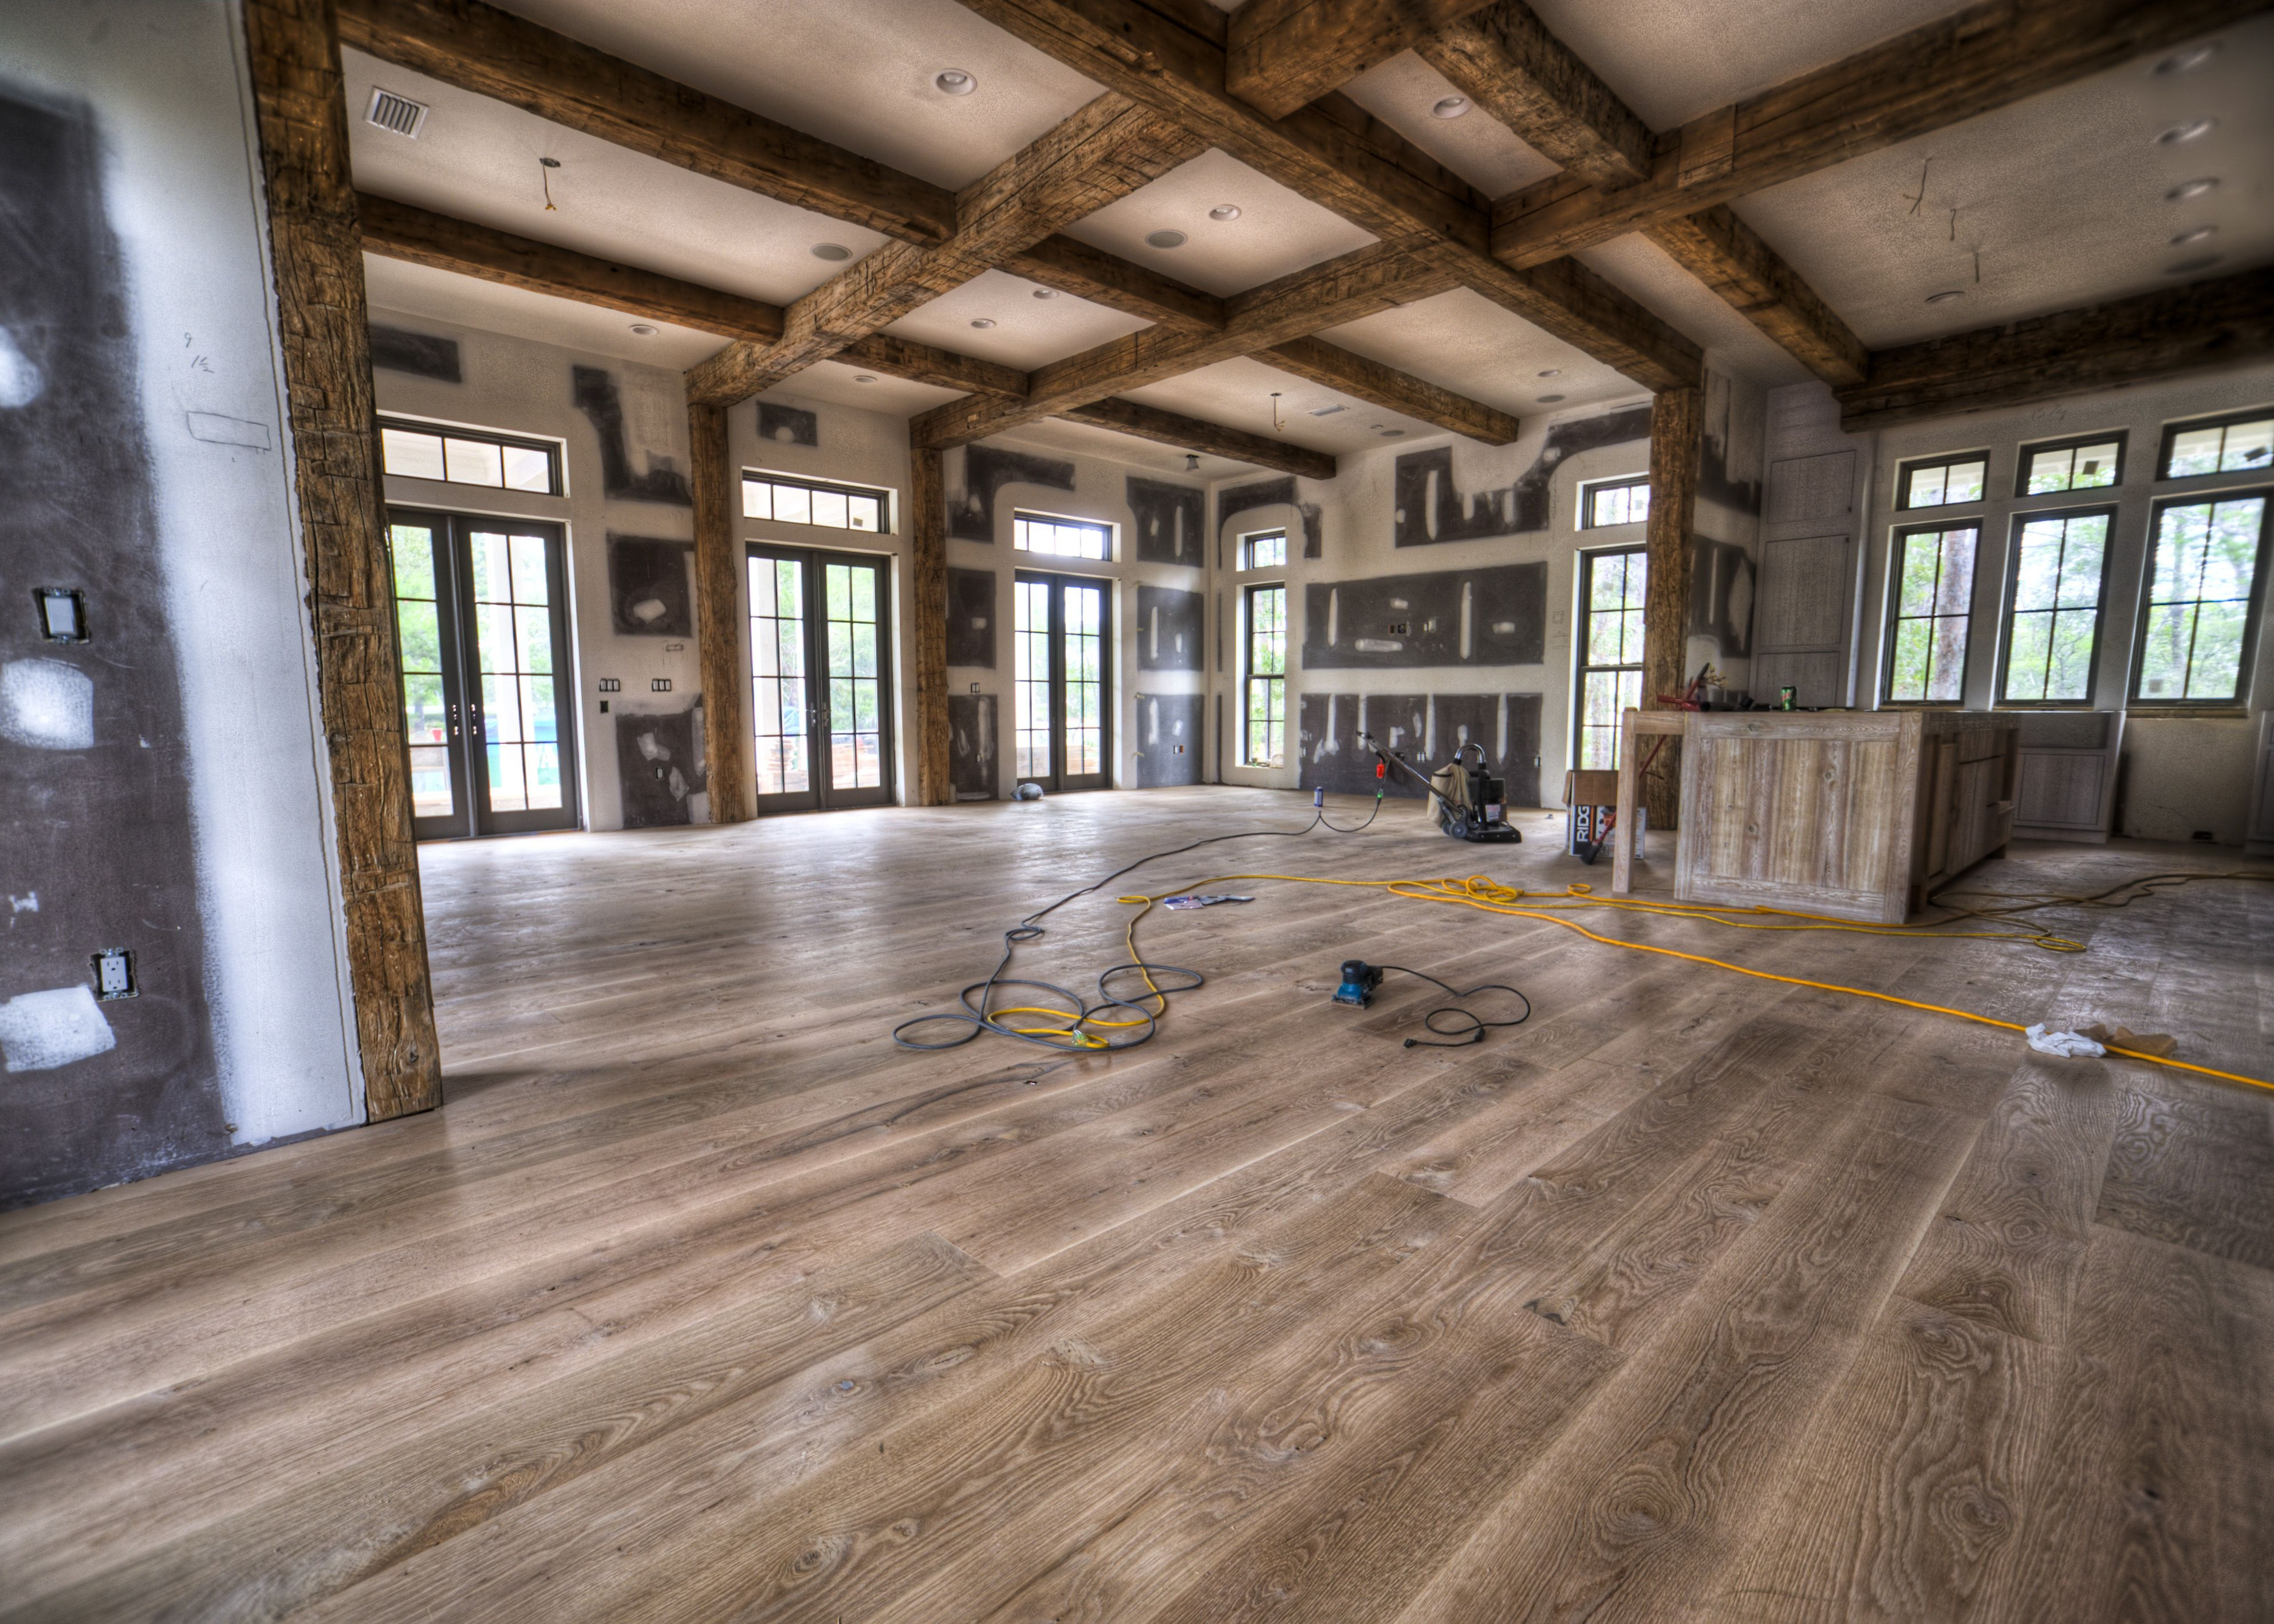 quality hardwood floor installation of reclaimed hand hewn beams and reclaimed flooring restoration of inside barnstormerswood offers quality reclaimed wood flooring in a variety of designs from circle sawn to hand scraped flooring our selection will not leave you